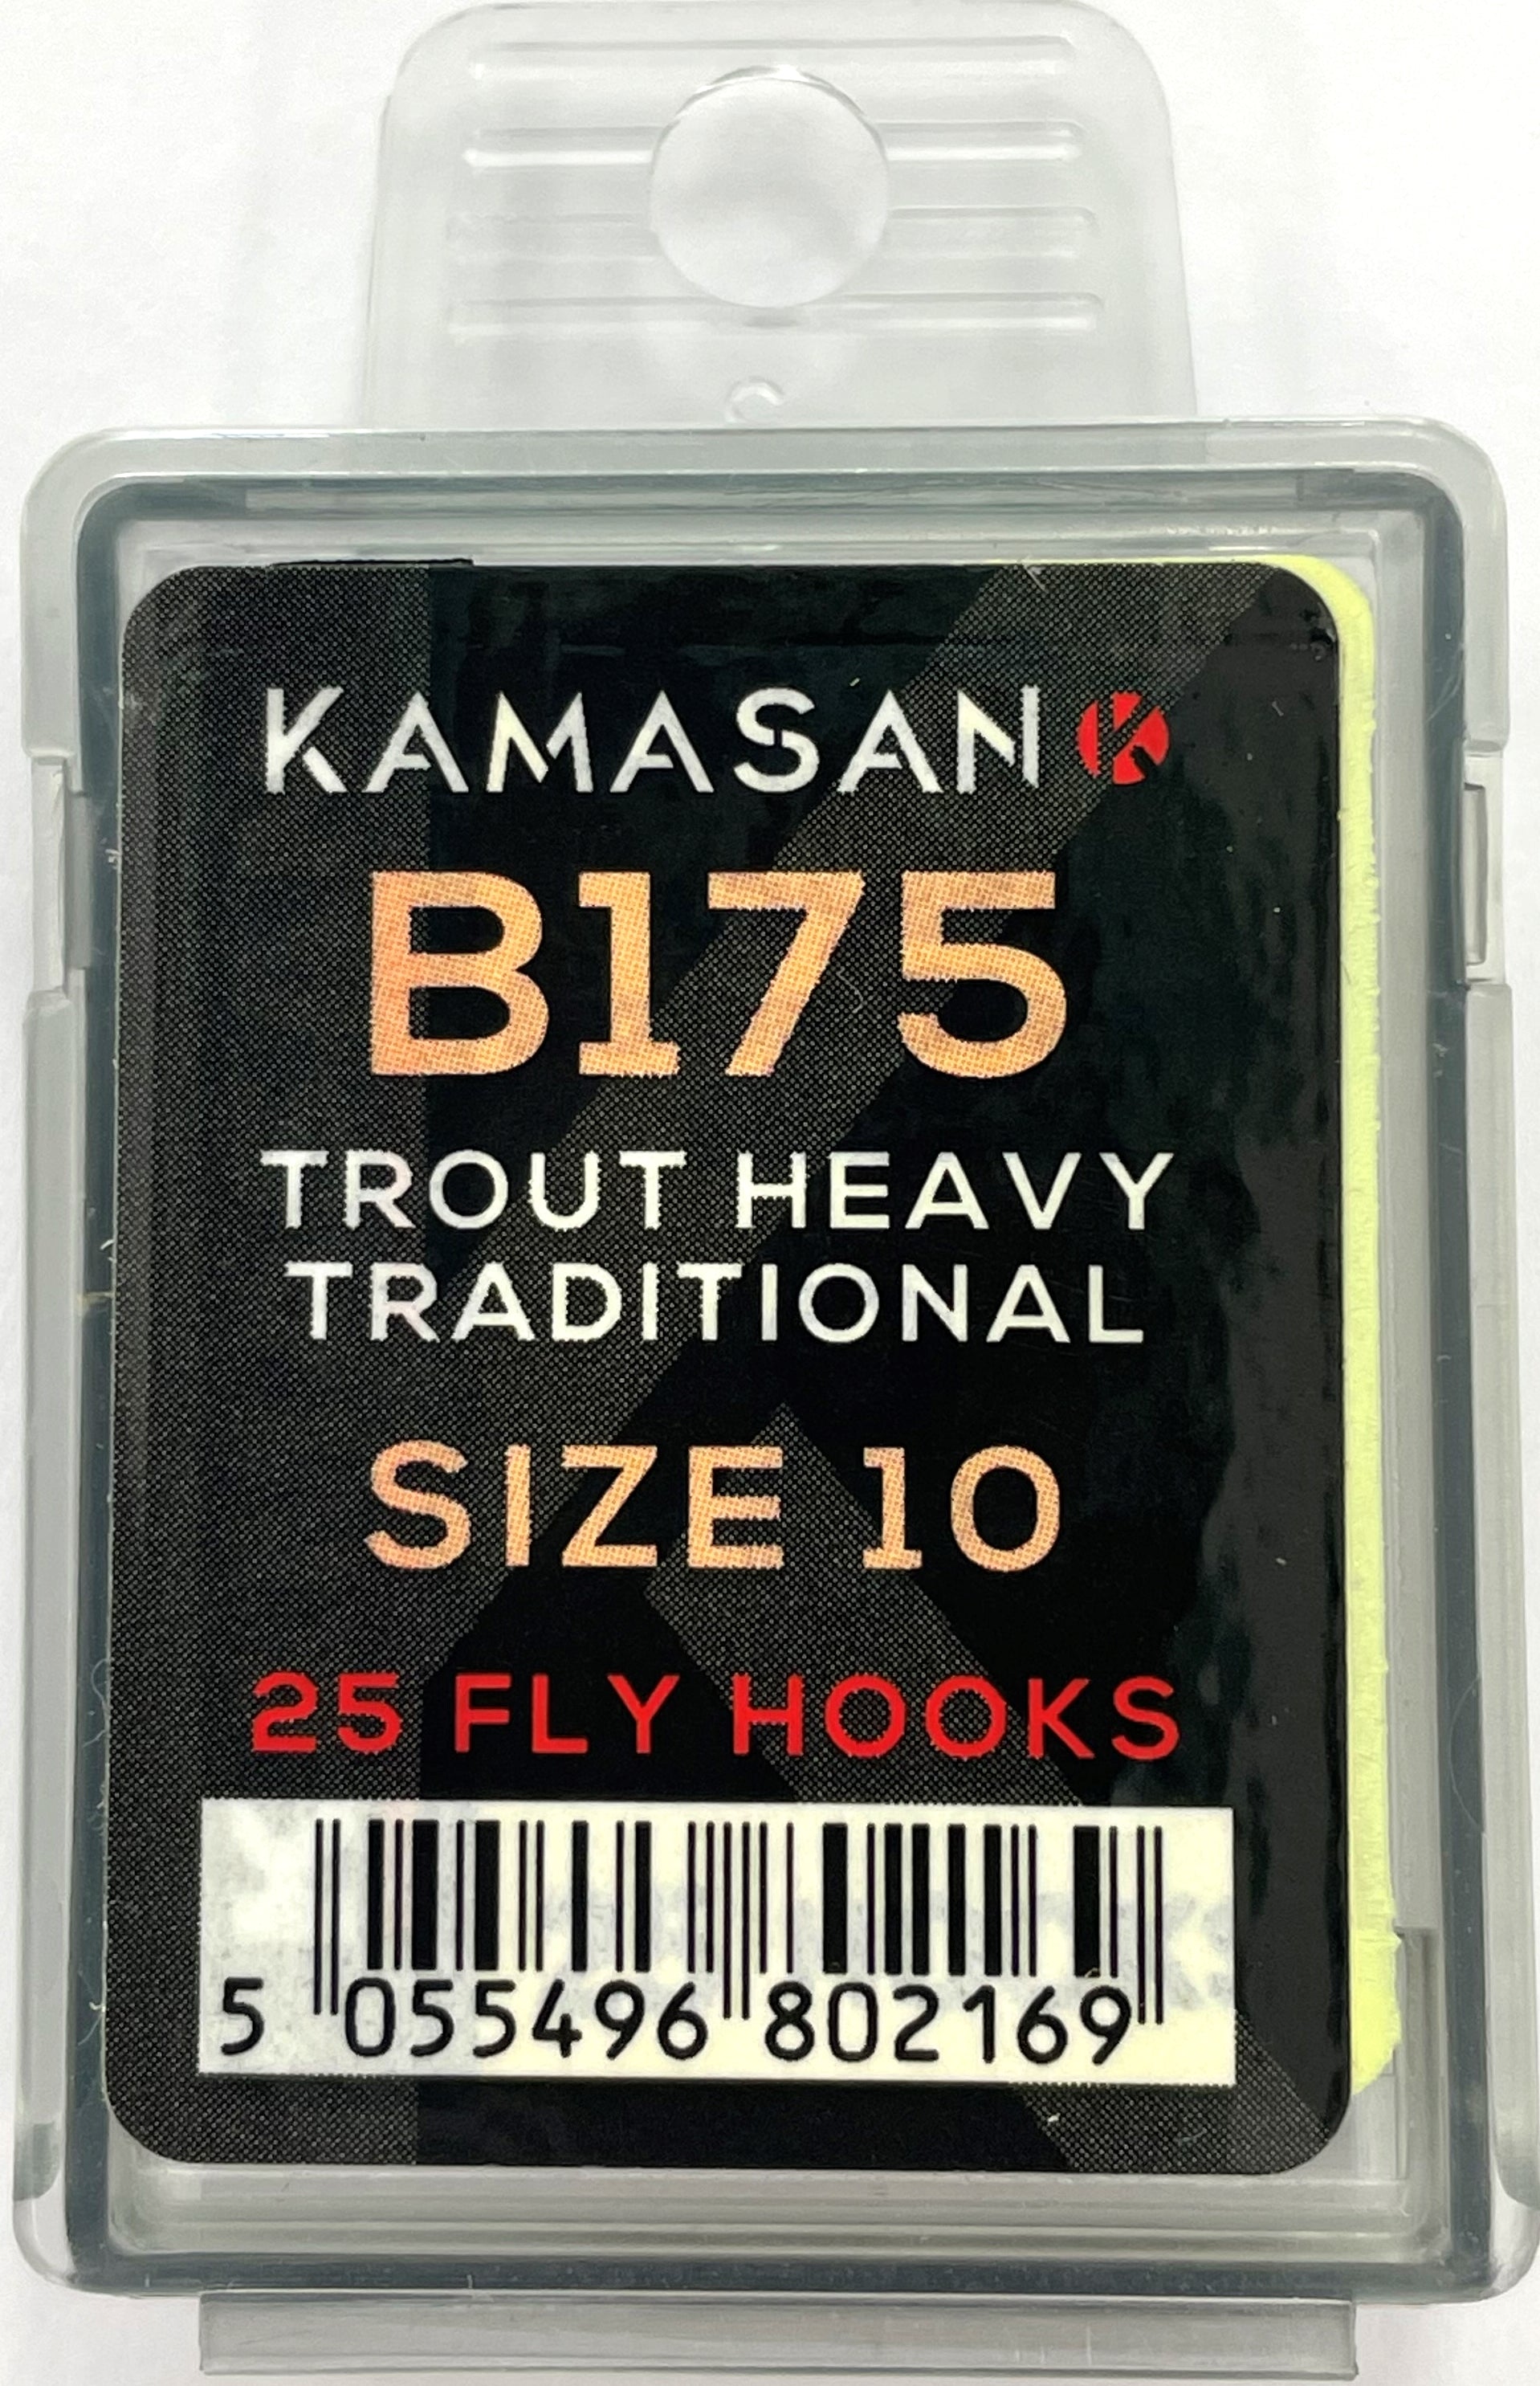 Kamasan B175 Trout Heavy Traditional Fly Hooks (Size 10) – Trophy